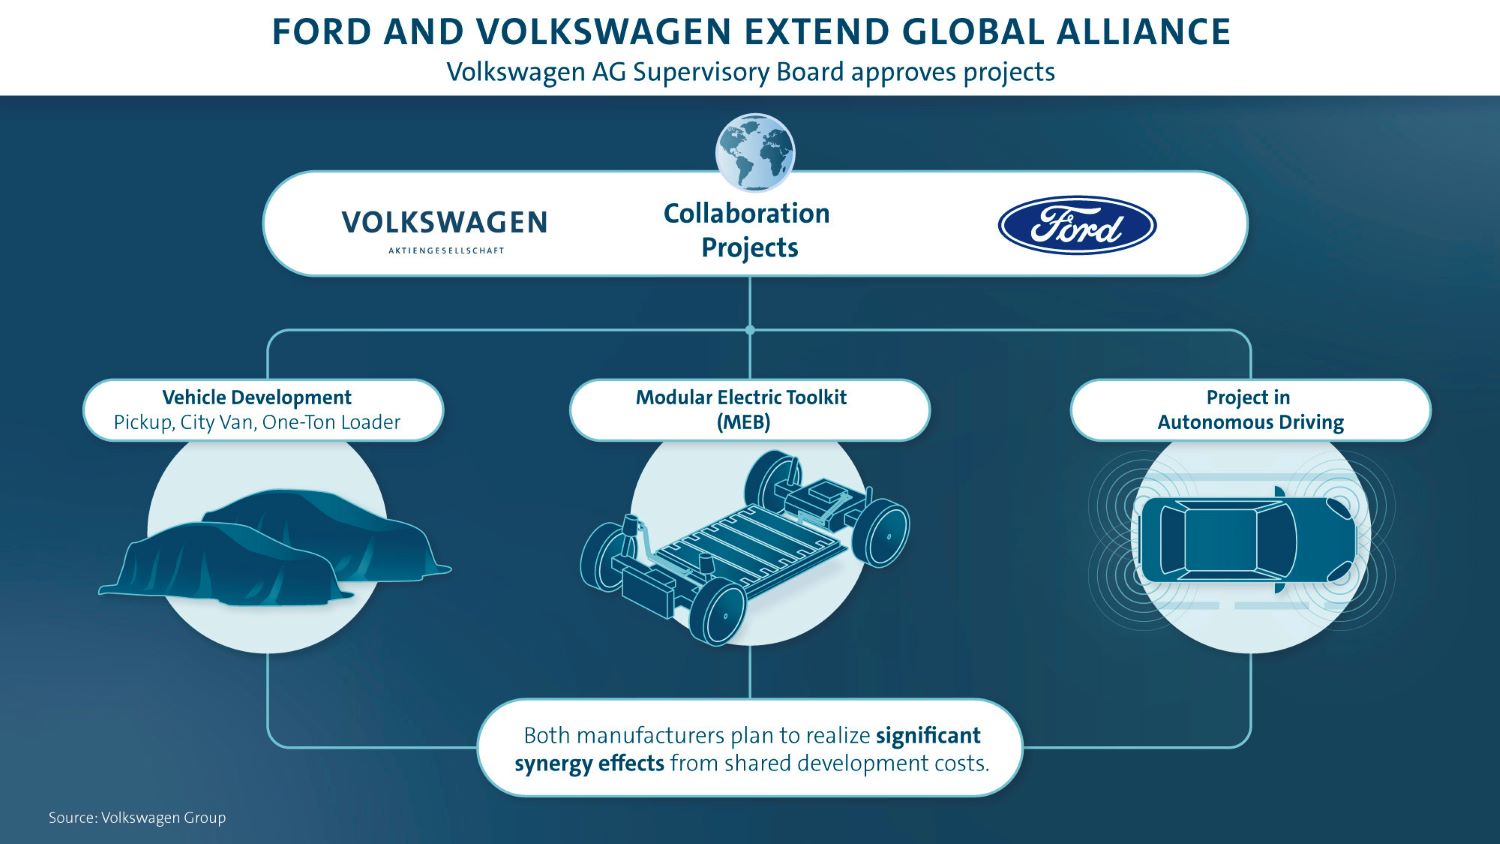 Ford-and-Volkswagen-Alliance-Projects-001.jpg